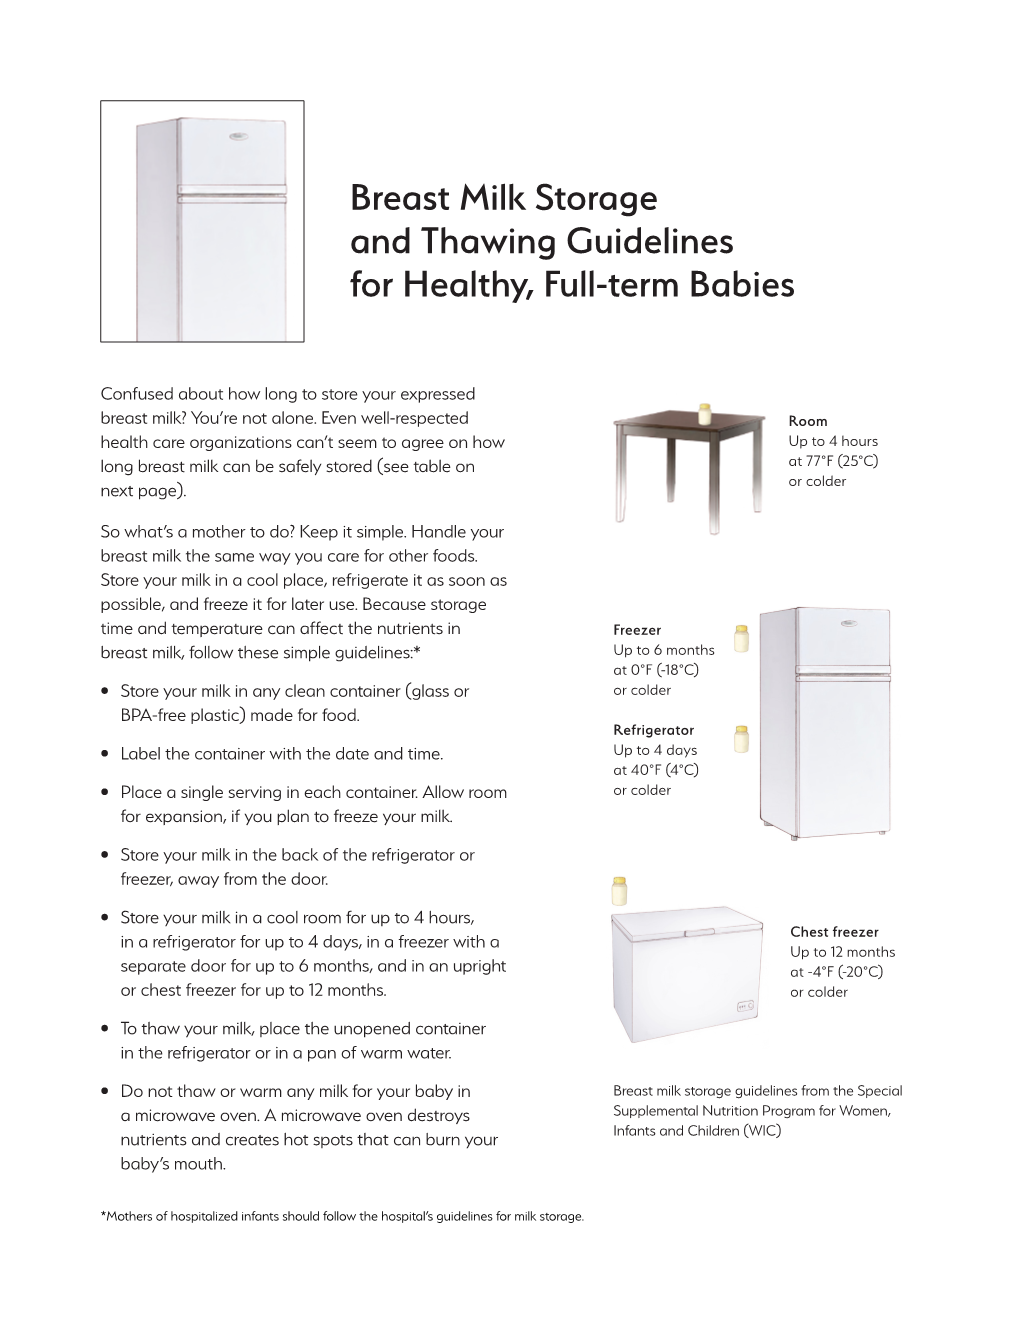 Breast Milk Storage and Thawing Guidelines for Healthy, Full-Term Babies